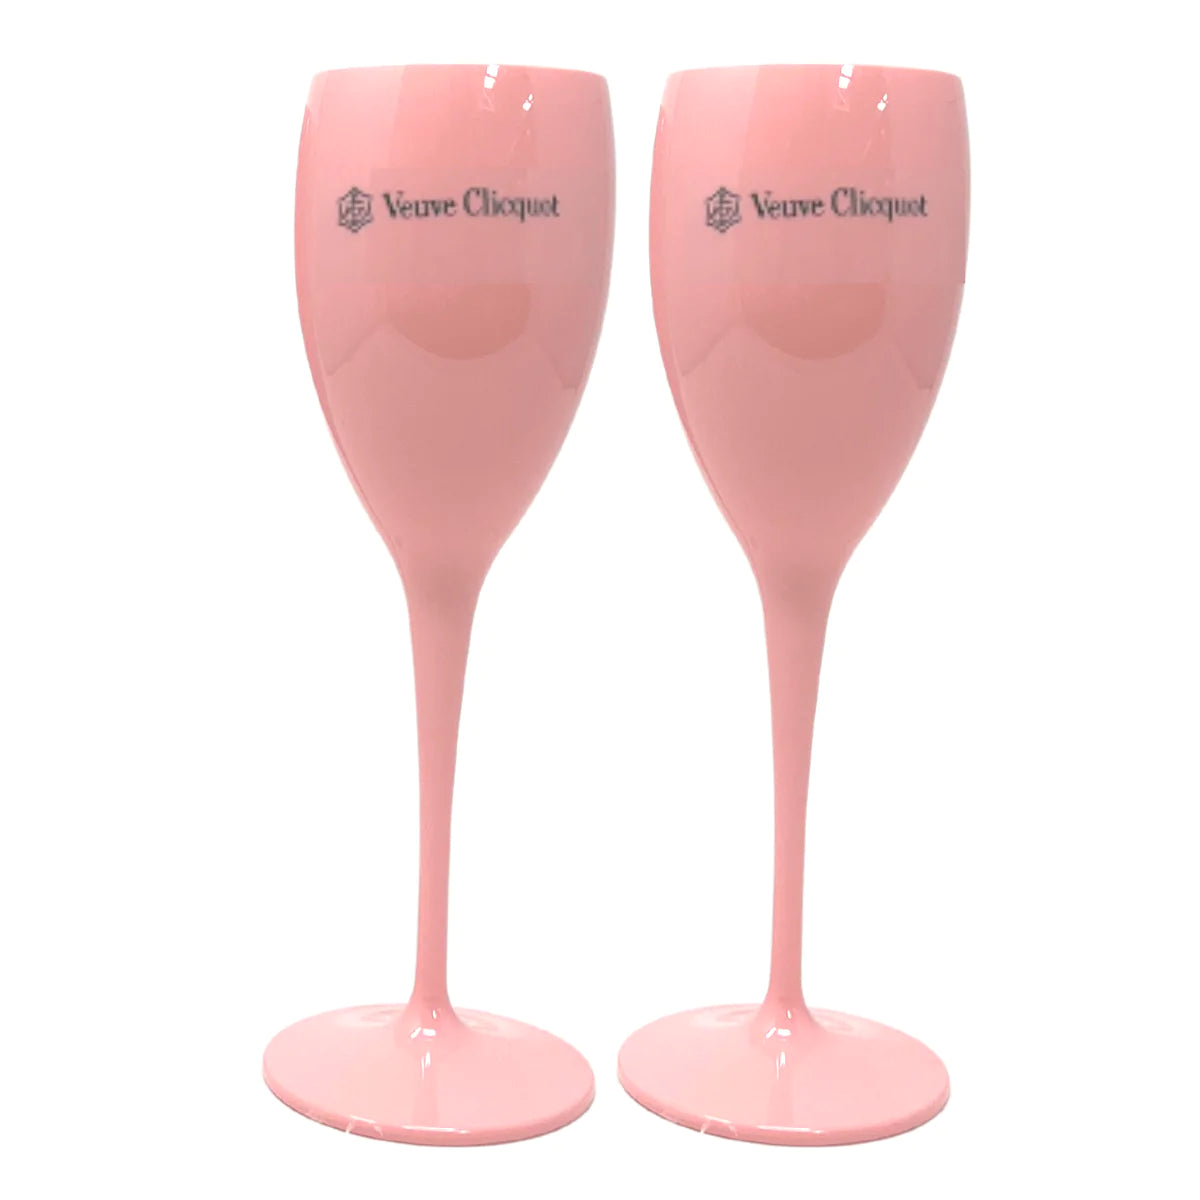 Pink rose colored plastic champagne glass from Tart by Taylor